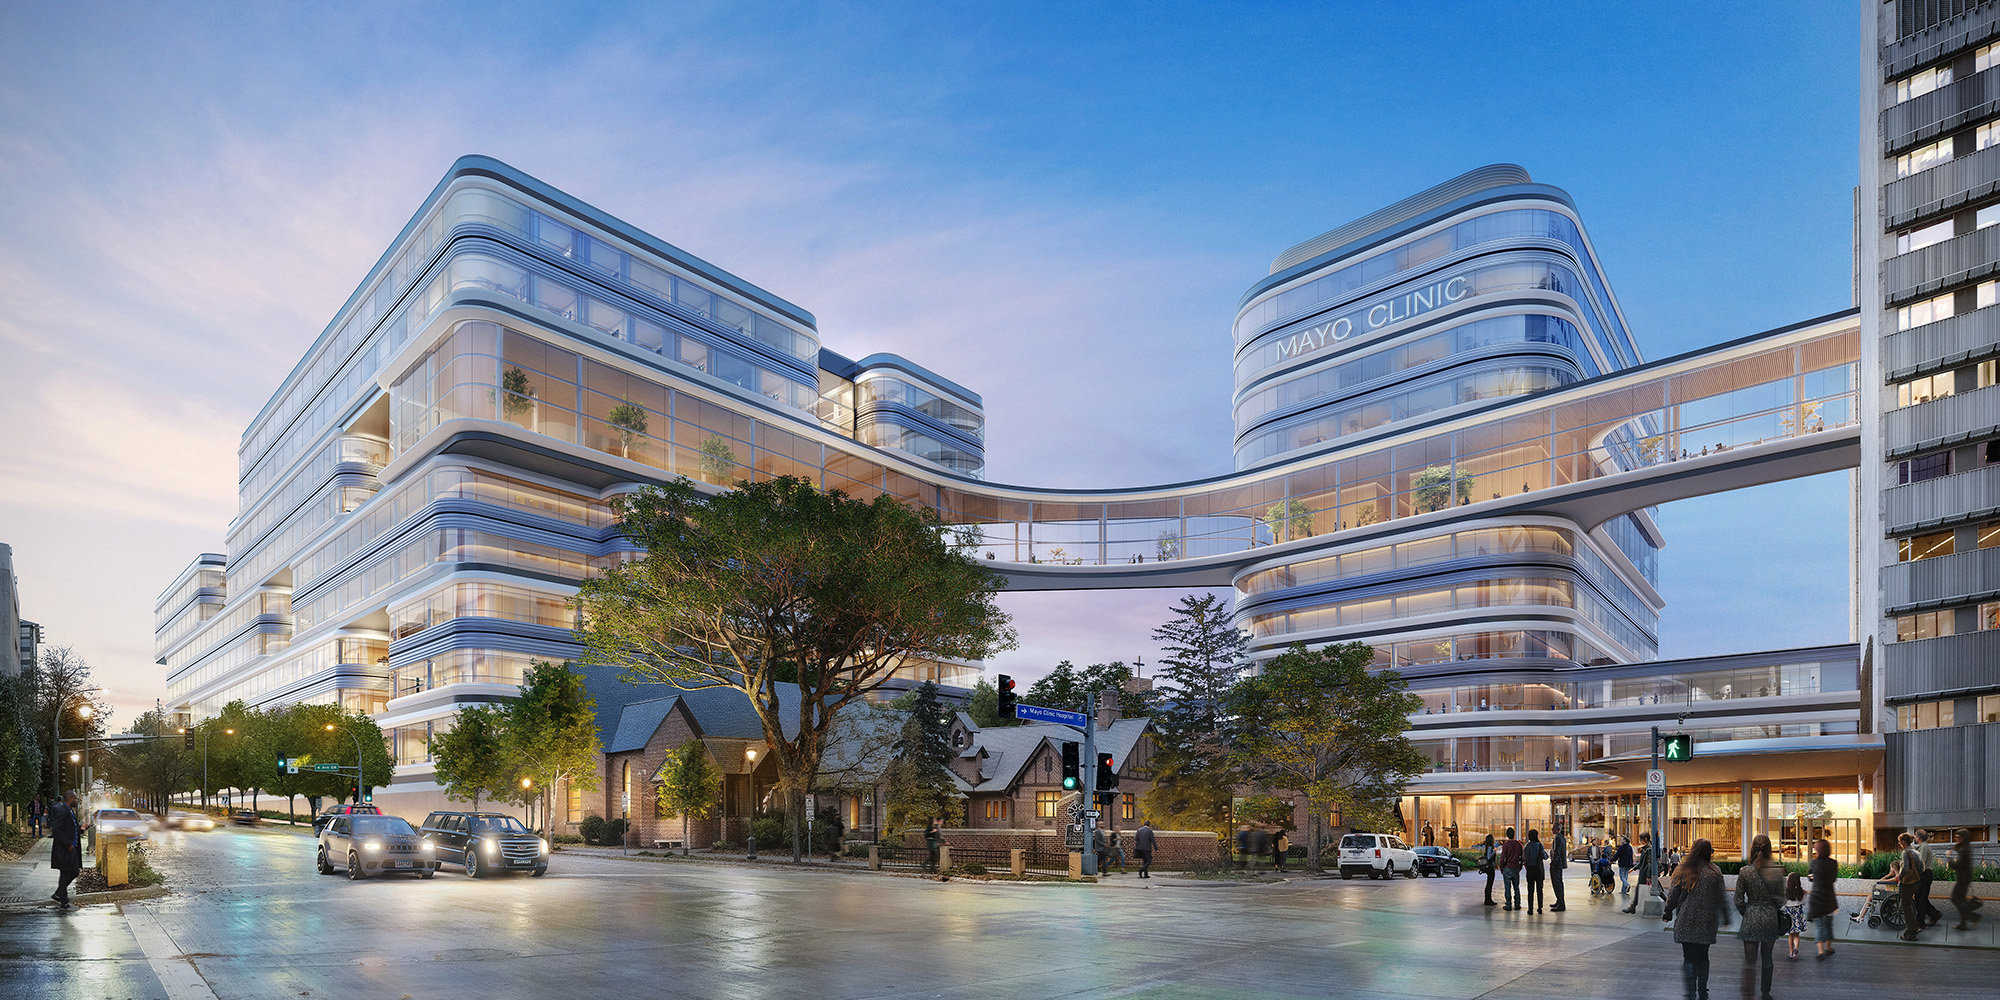 Foster + Partners And Cannondesign Selected To Design Transformative Healthcare Project For Mayo Clinic; Gilbane Building Company To Lead Construction Management